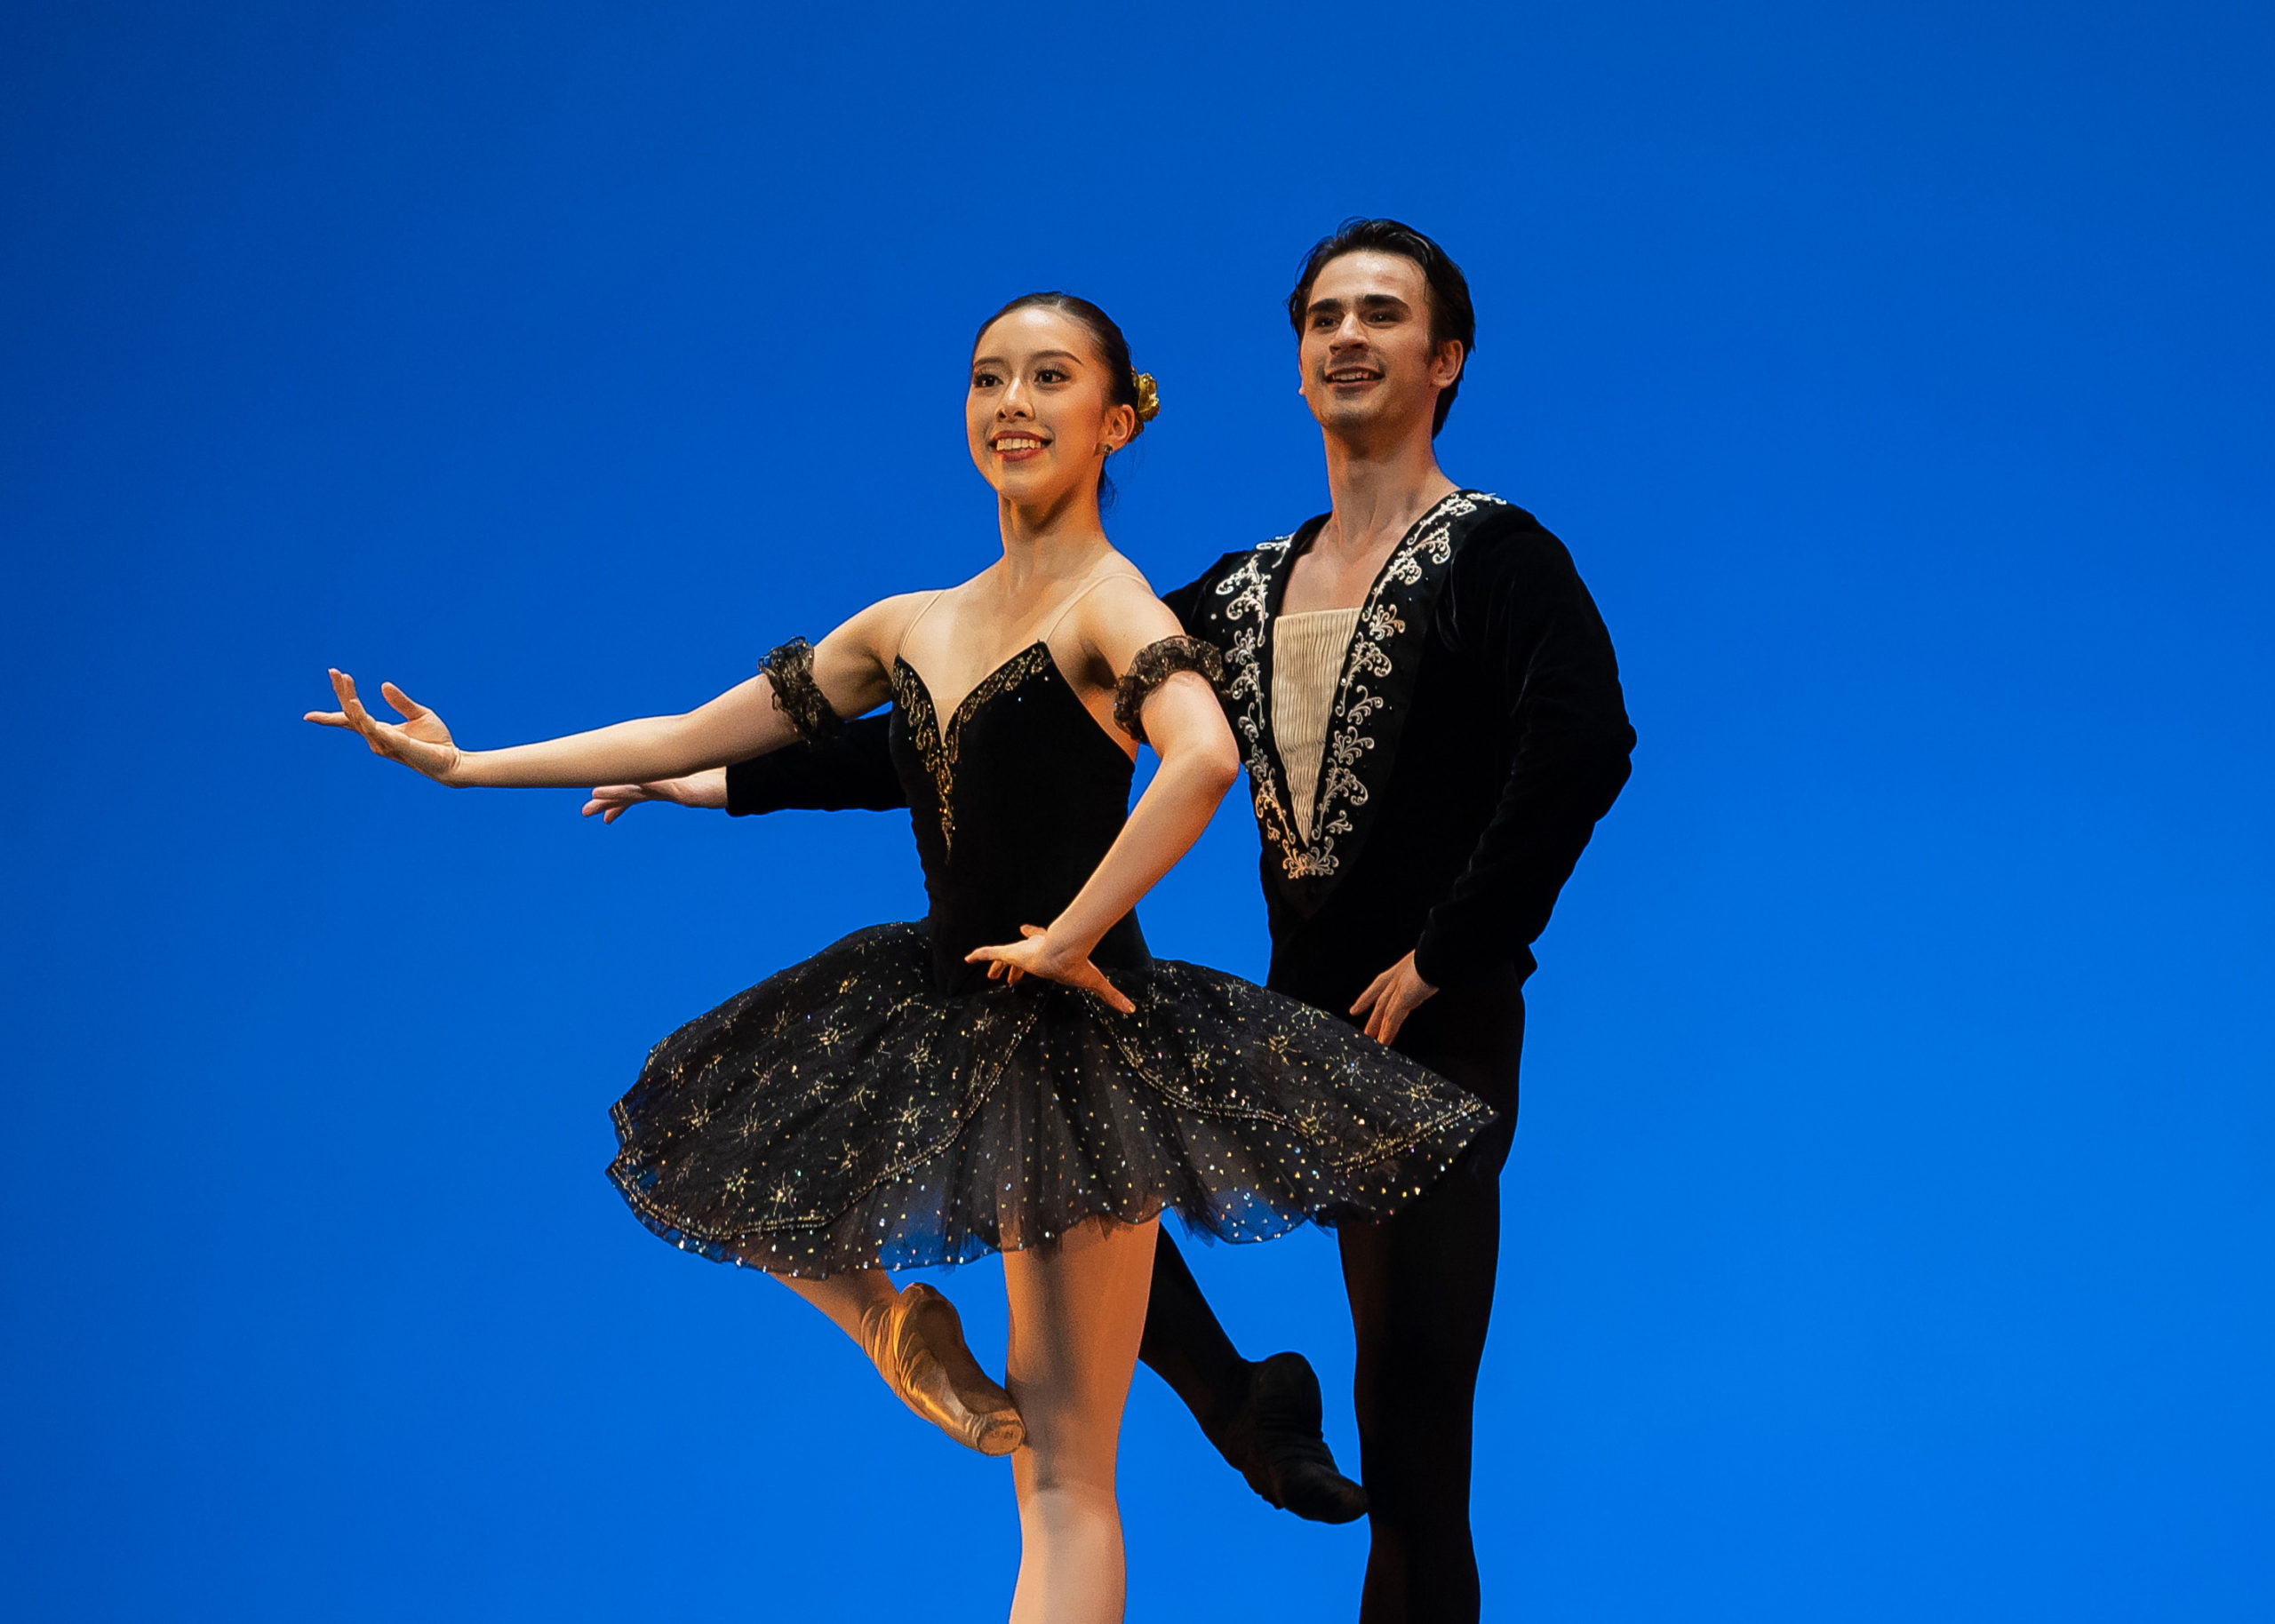 Yuka Masumoto, in a black tutu, and Clark Eselgroth, in a black tunic and tights, are shown from the knee up performing onstage in front of a blue backdrop. Masumoto stands in front of Eselgroth, and they both perform a passé with their right leg and hold their right arm out with an open palm. Their left hands are placed on their hips, and they both smile towards the audience.